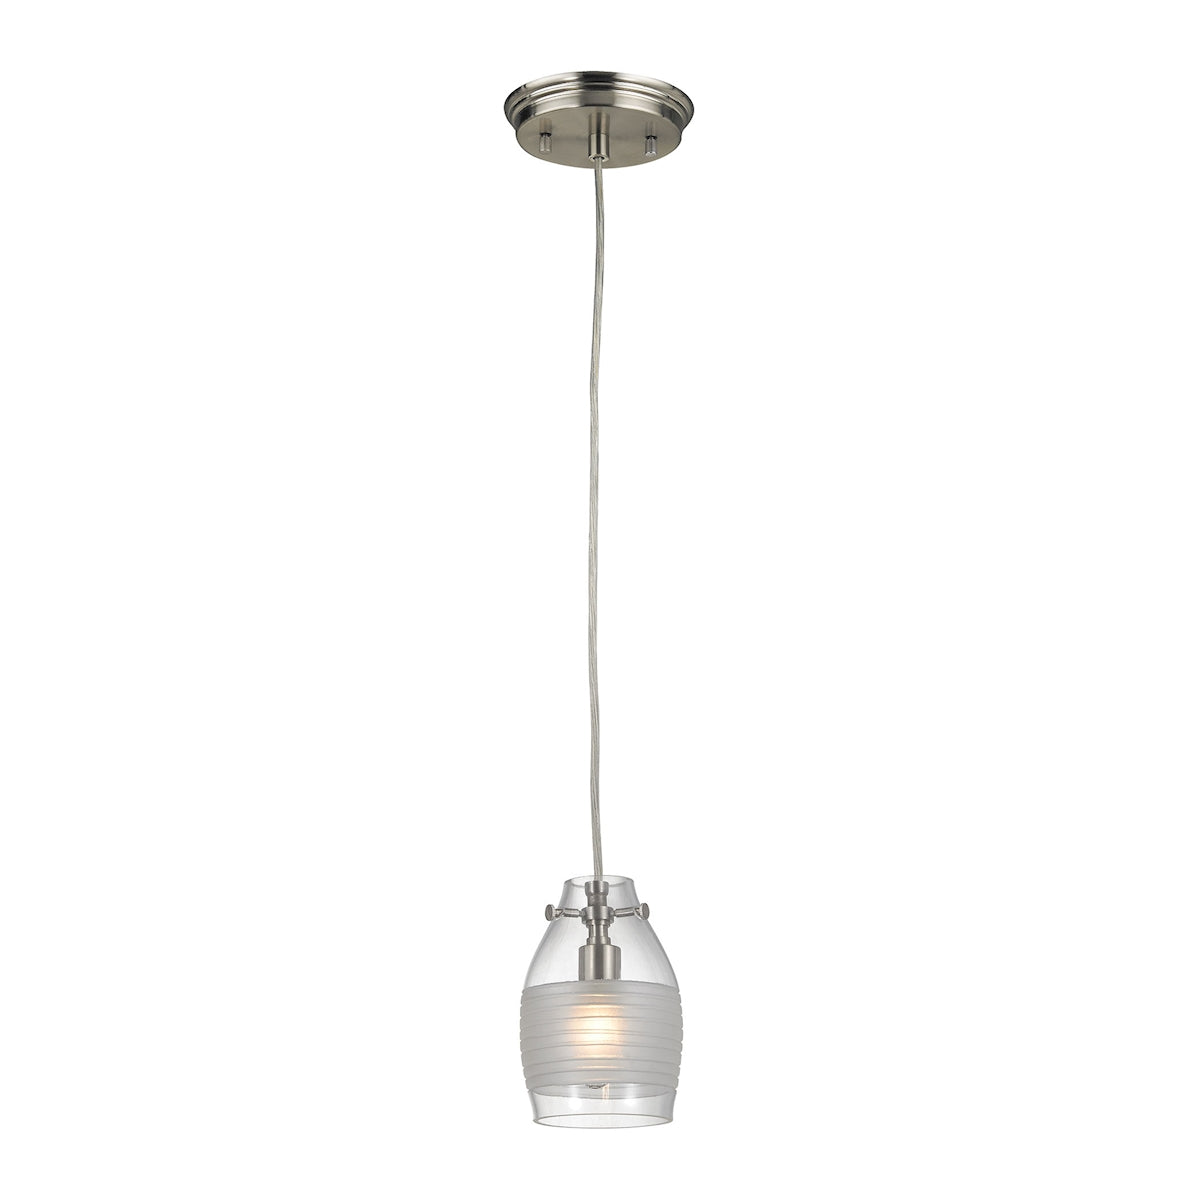 ELK Lighting 46161/1 Carved Glass 1-Light Mini Pendant in Brushed Nickel with Glass Shade